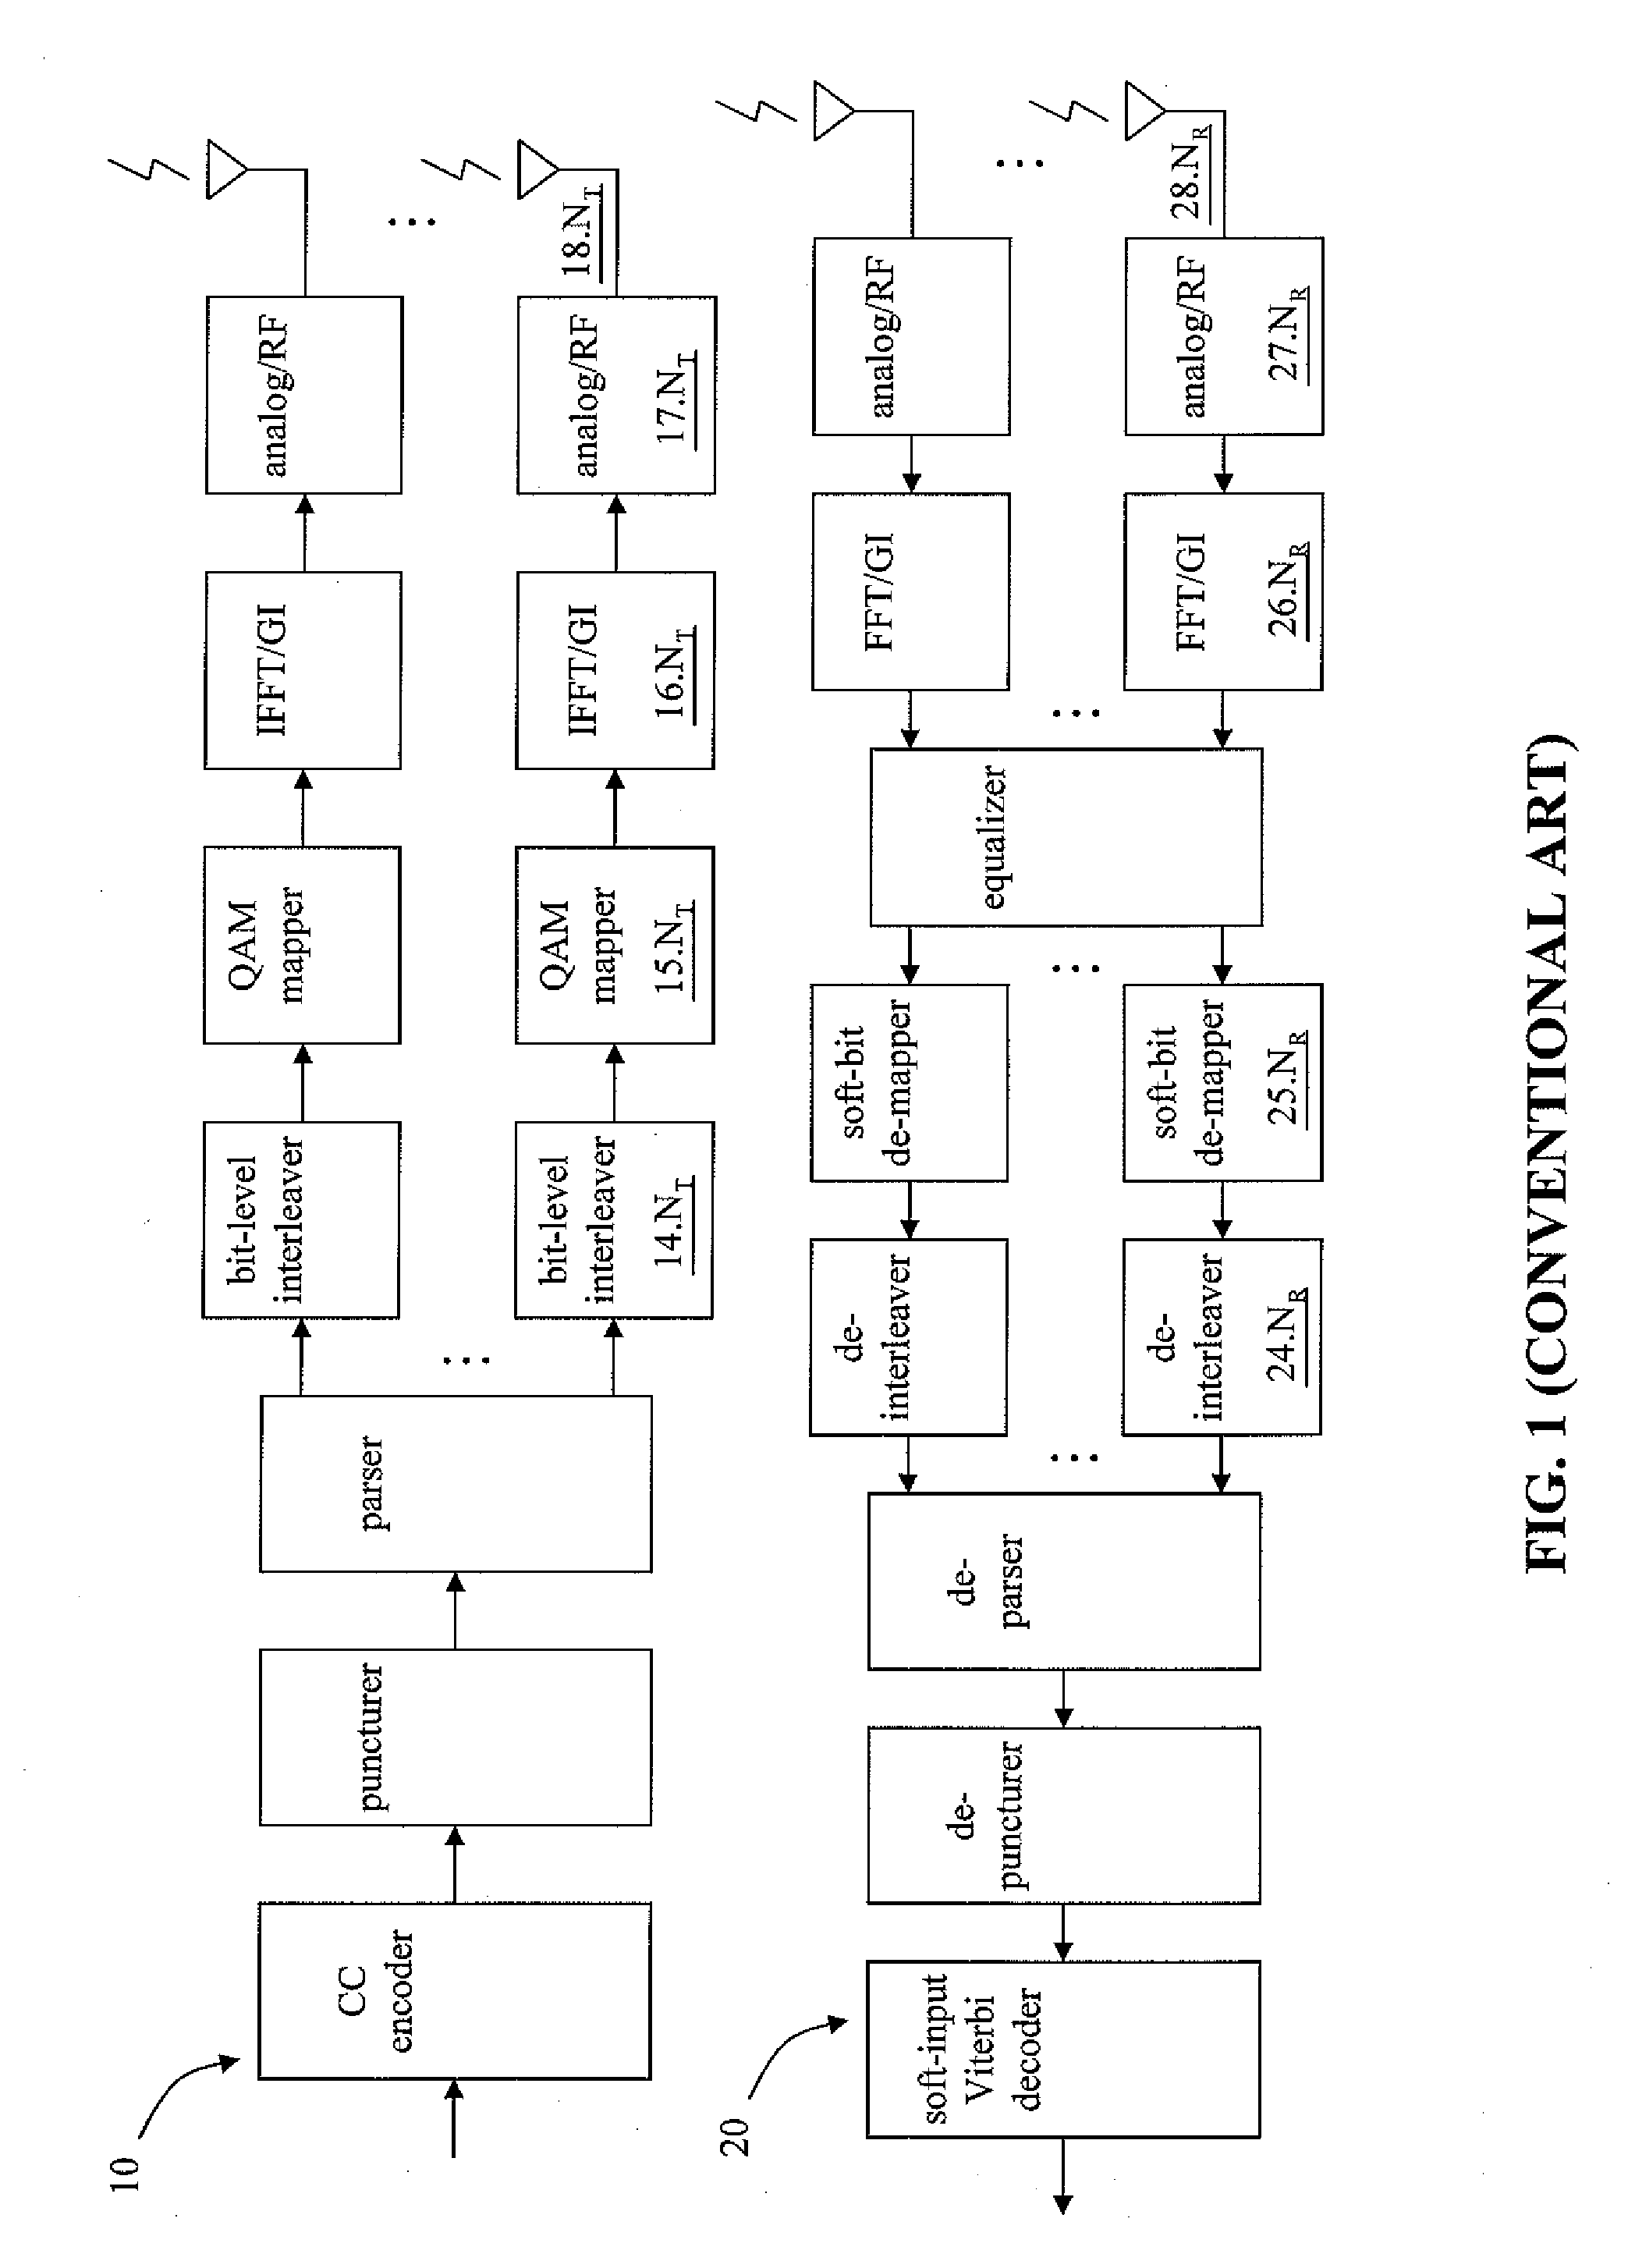 Tone-Interleaved Coded Modulation Scheme for MIMO OFDM Communication